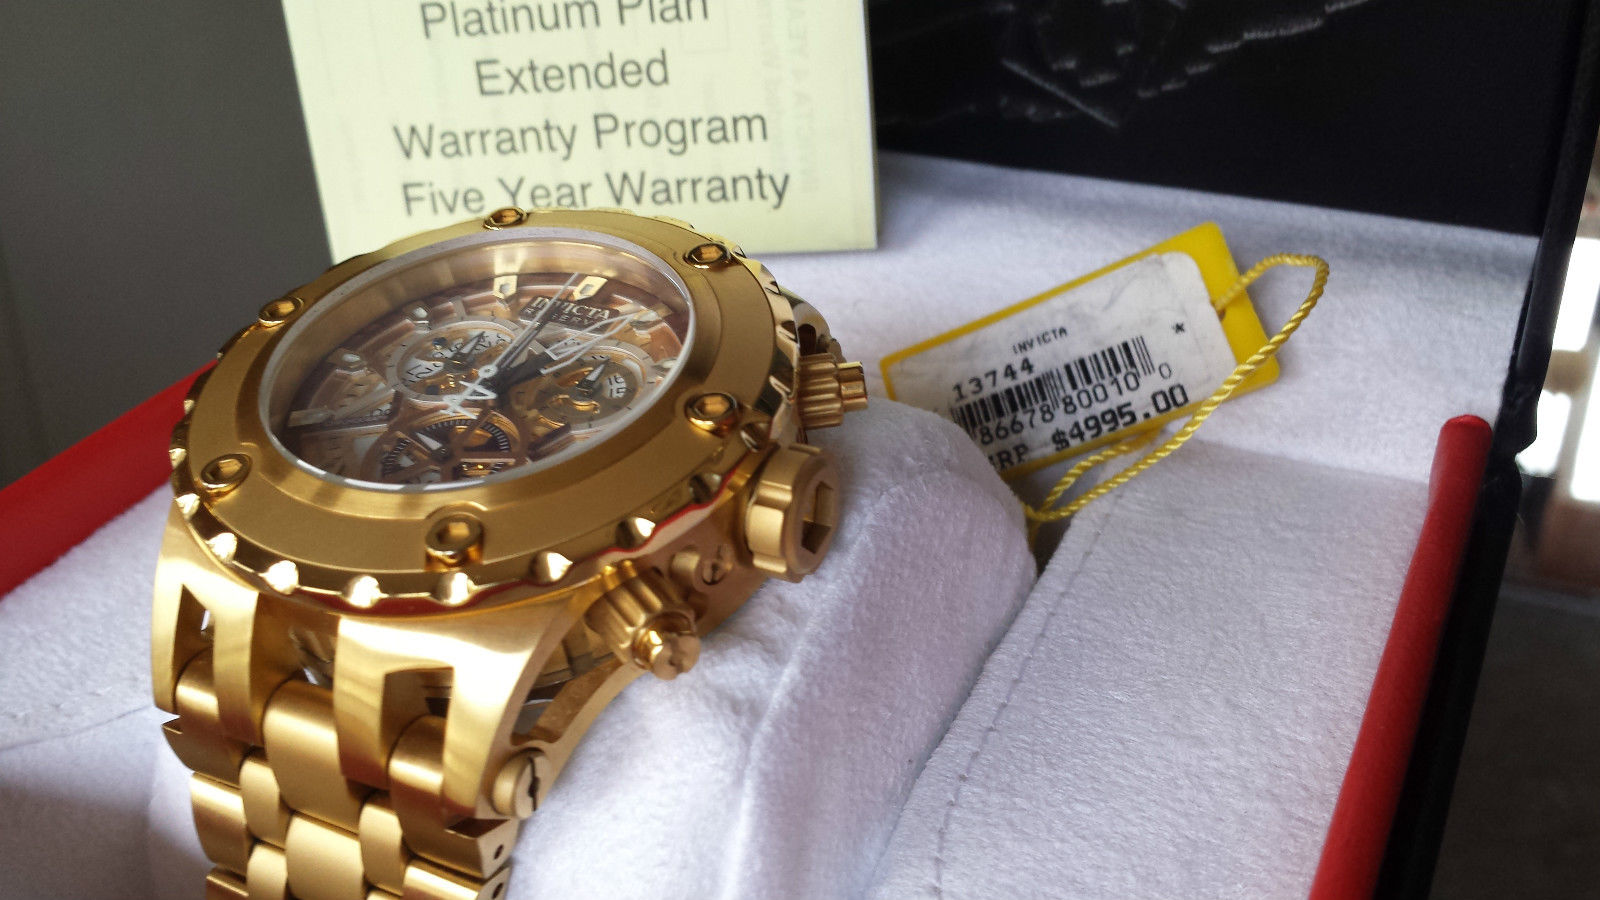 Invicta Reserve 1568 Dive Watch Gold Chronograph,boxed all papers included along with price- $4995 - Image 2 of 9